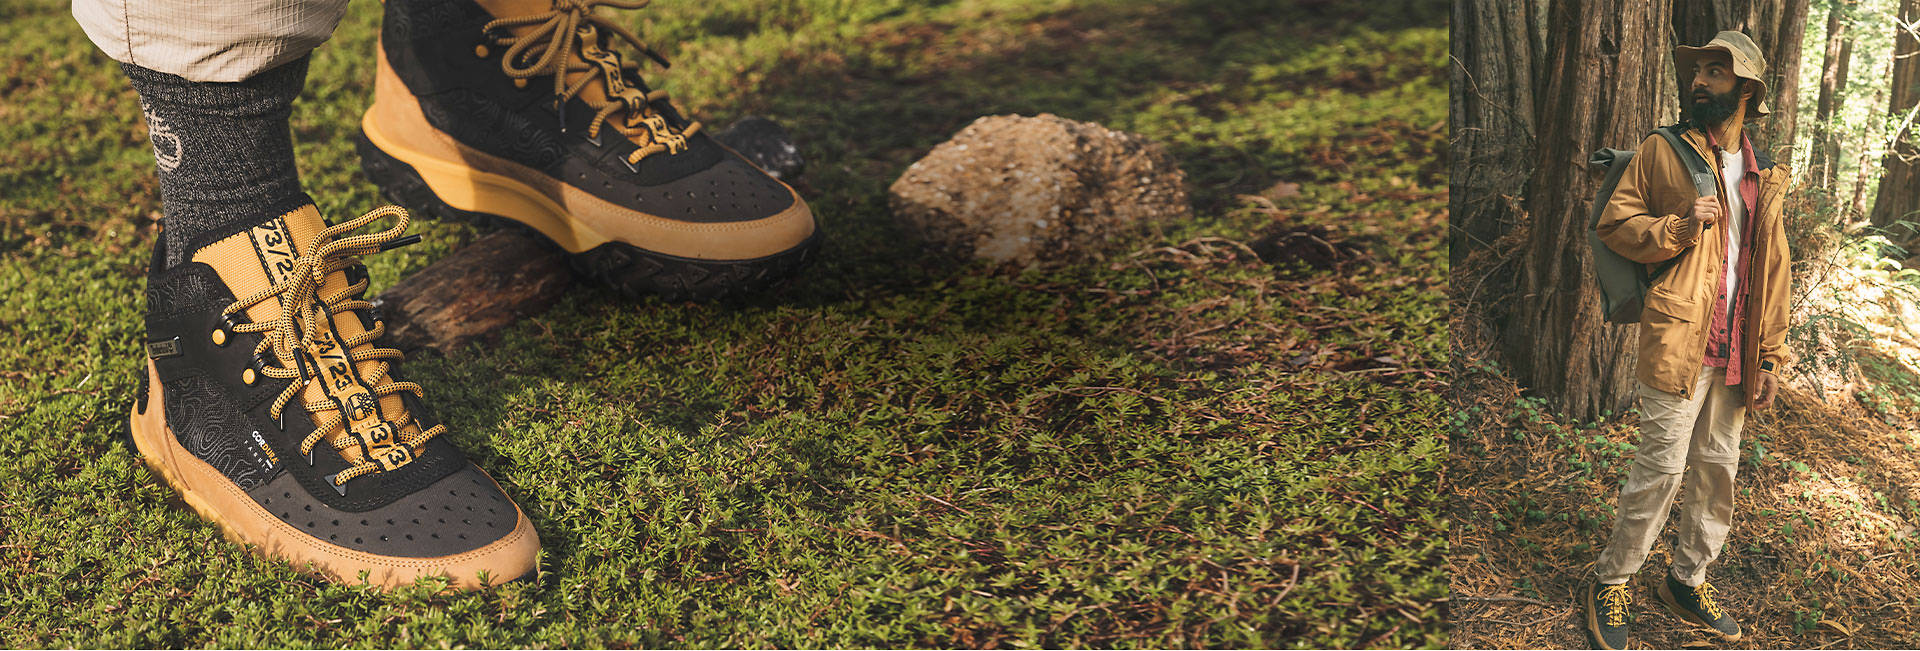 Image of a closeup pair of wheat and black low hiking shoes with perforated tops and bungee lacing, standing on a patch of green moss.